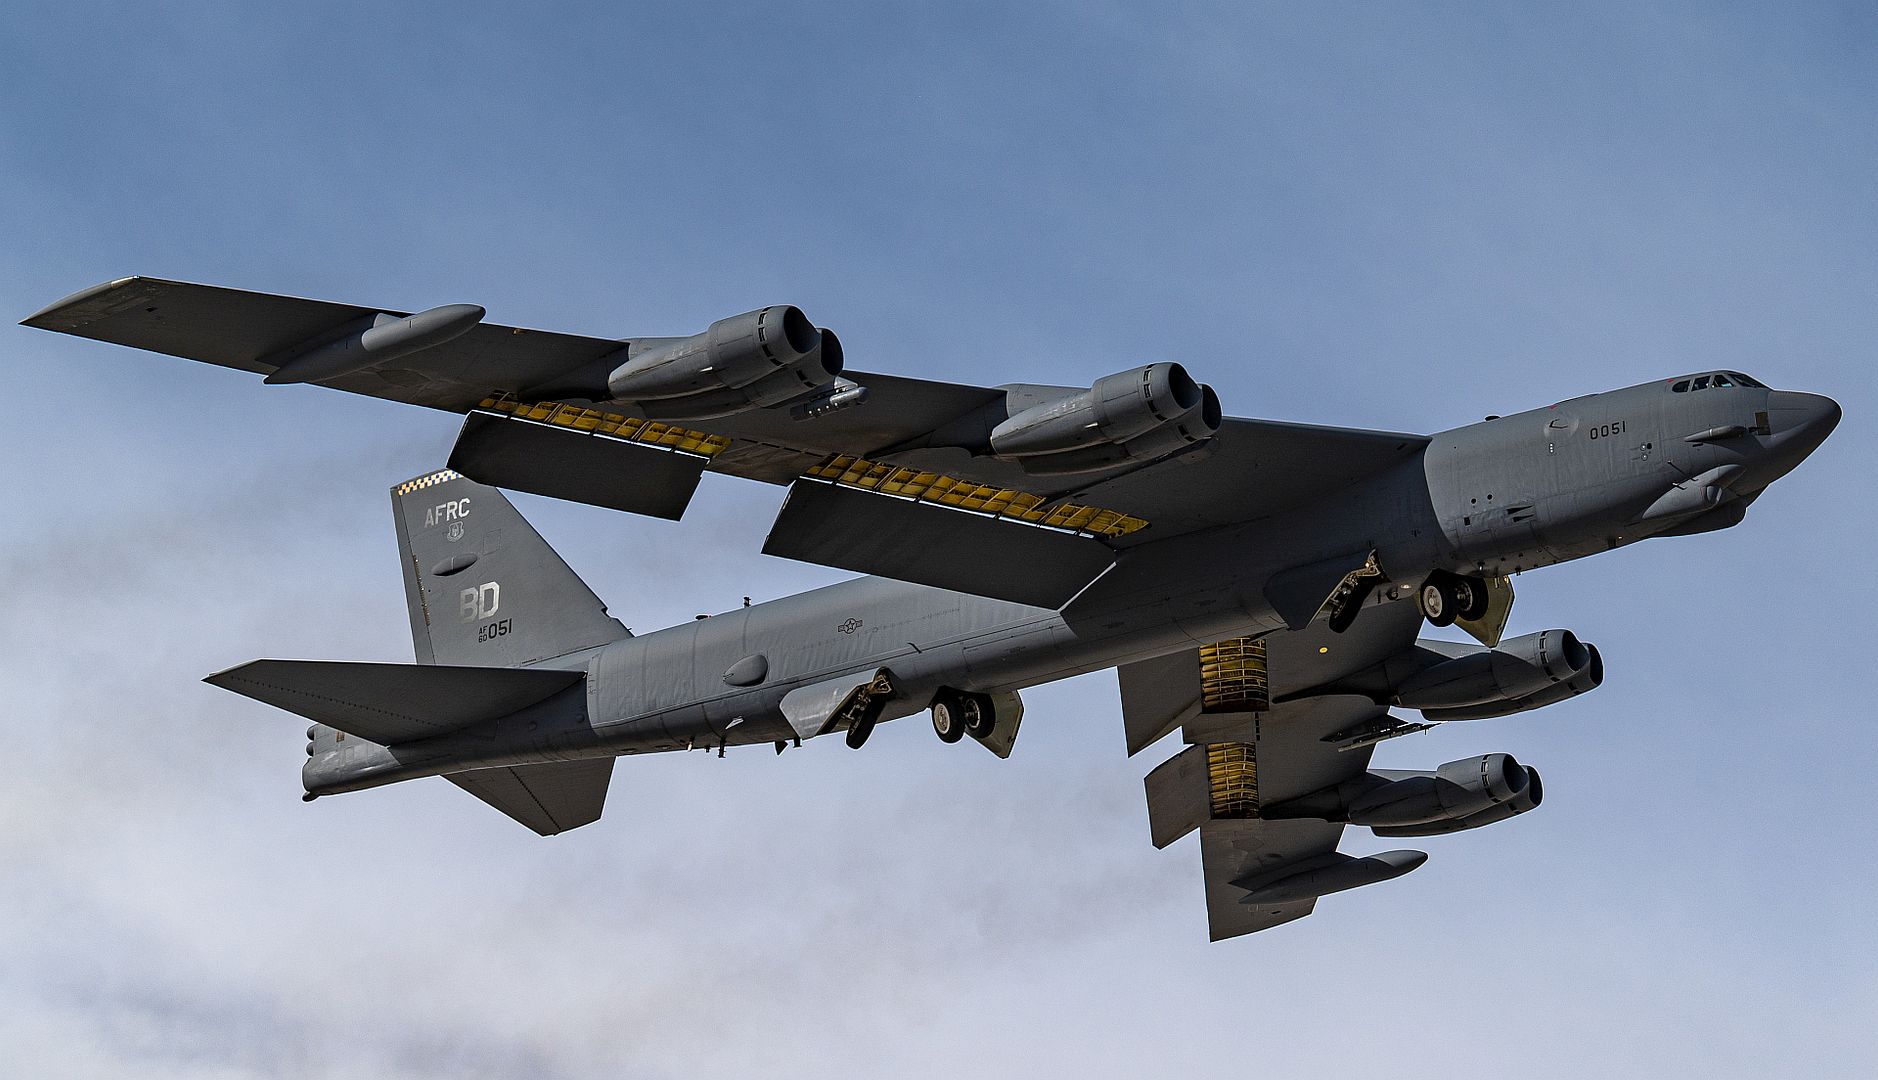 52 Stratofortress Bomber Aircraft Assigned To The 340th Weapons Squadron At Barksdale Air Force Base